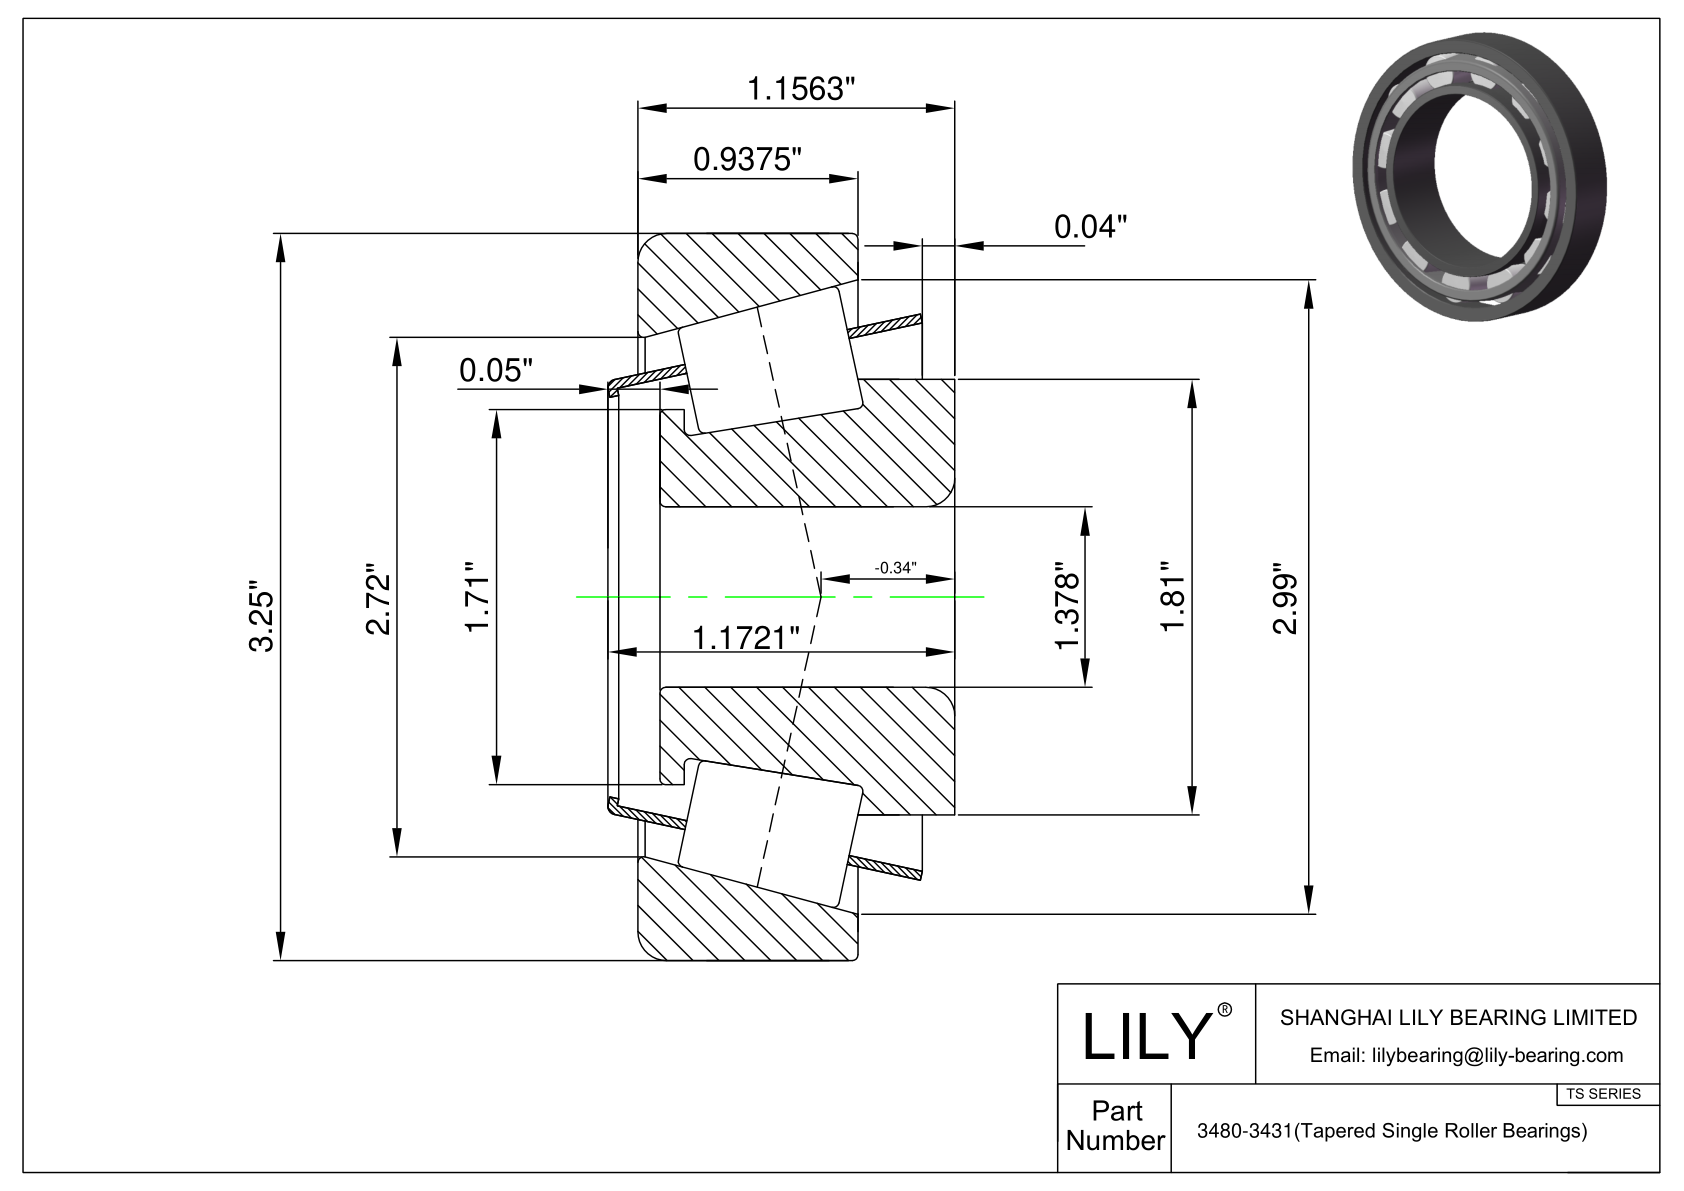 3480-3431 TS (Tapered Single Roller Bearings) (Imperial) cad drawing